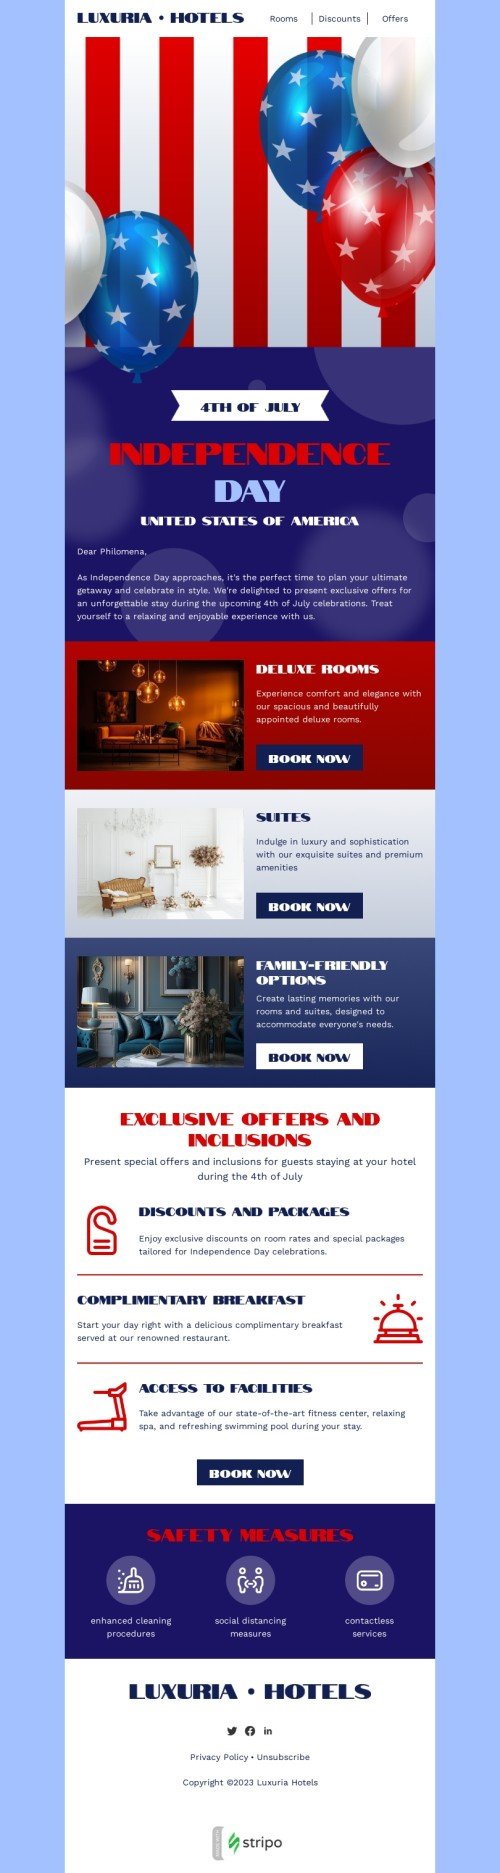 Independence Day email template "Independence Day approaches" for hotels industry mobile view